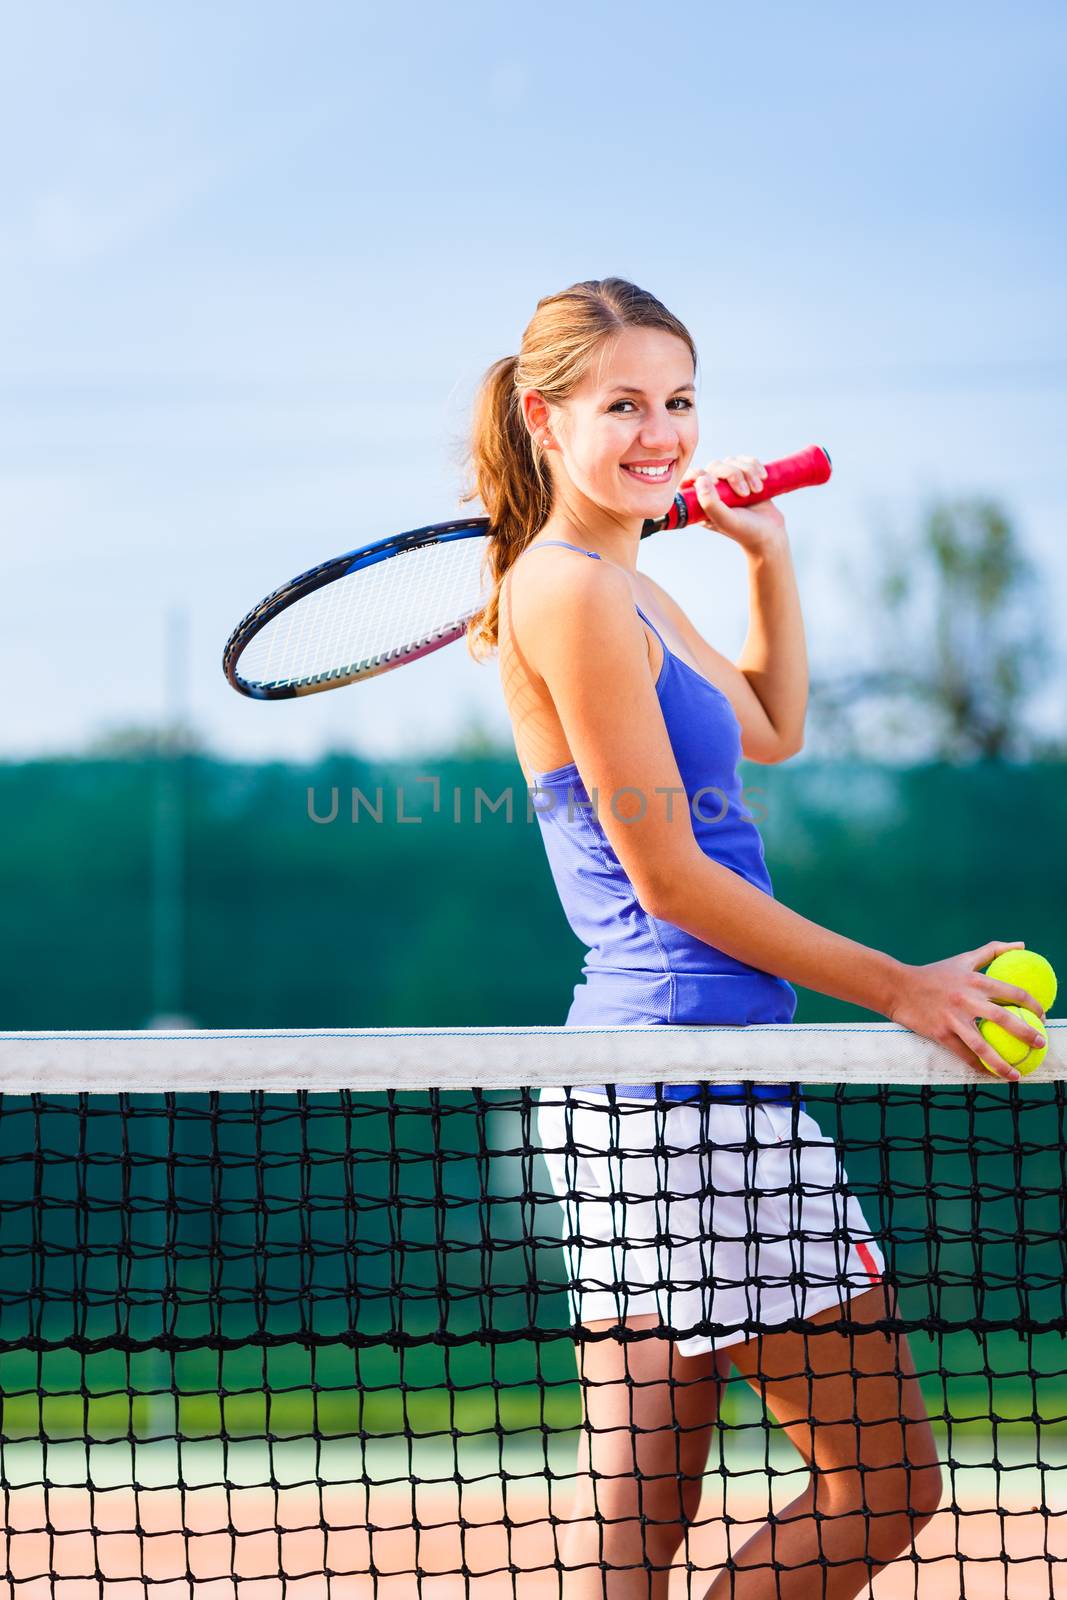 Portrait of a pretty young tennis player with copyspace